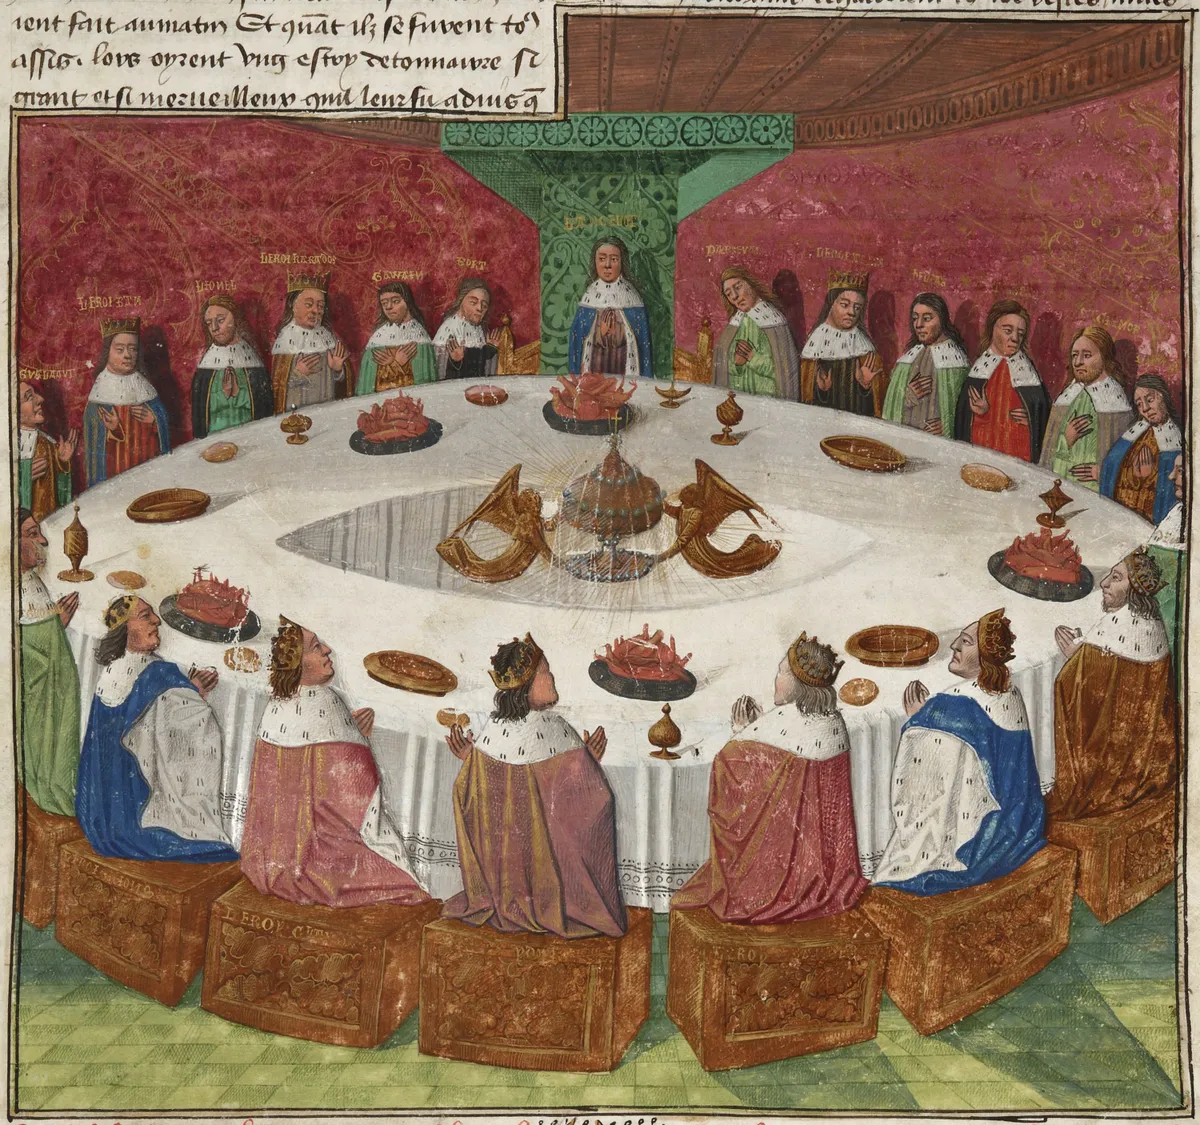 Knights of the round table